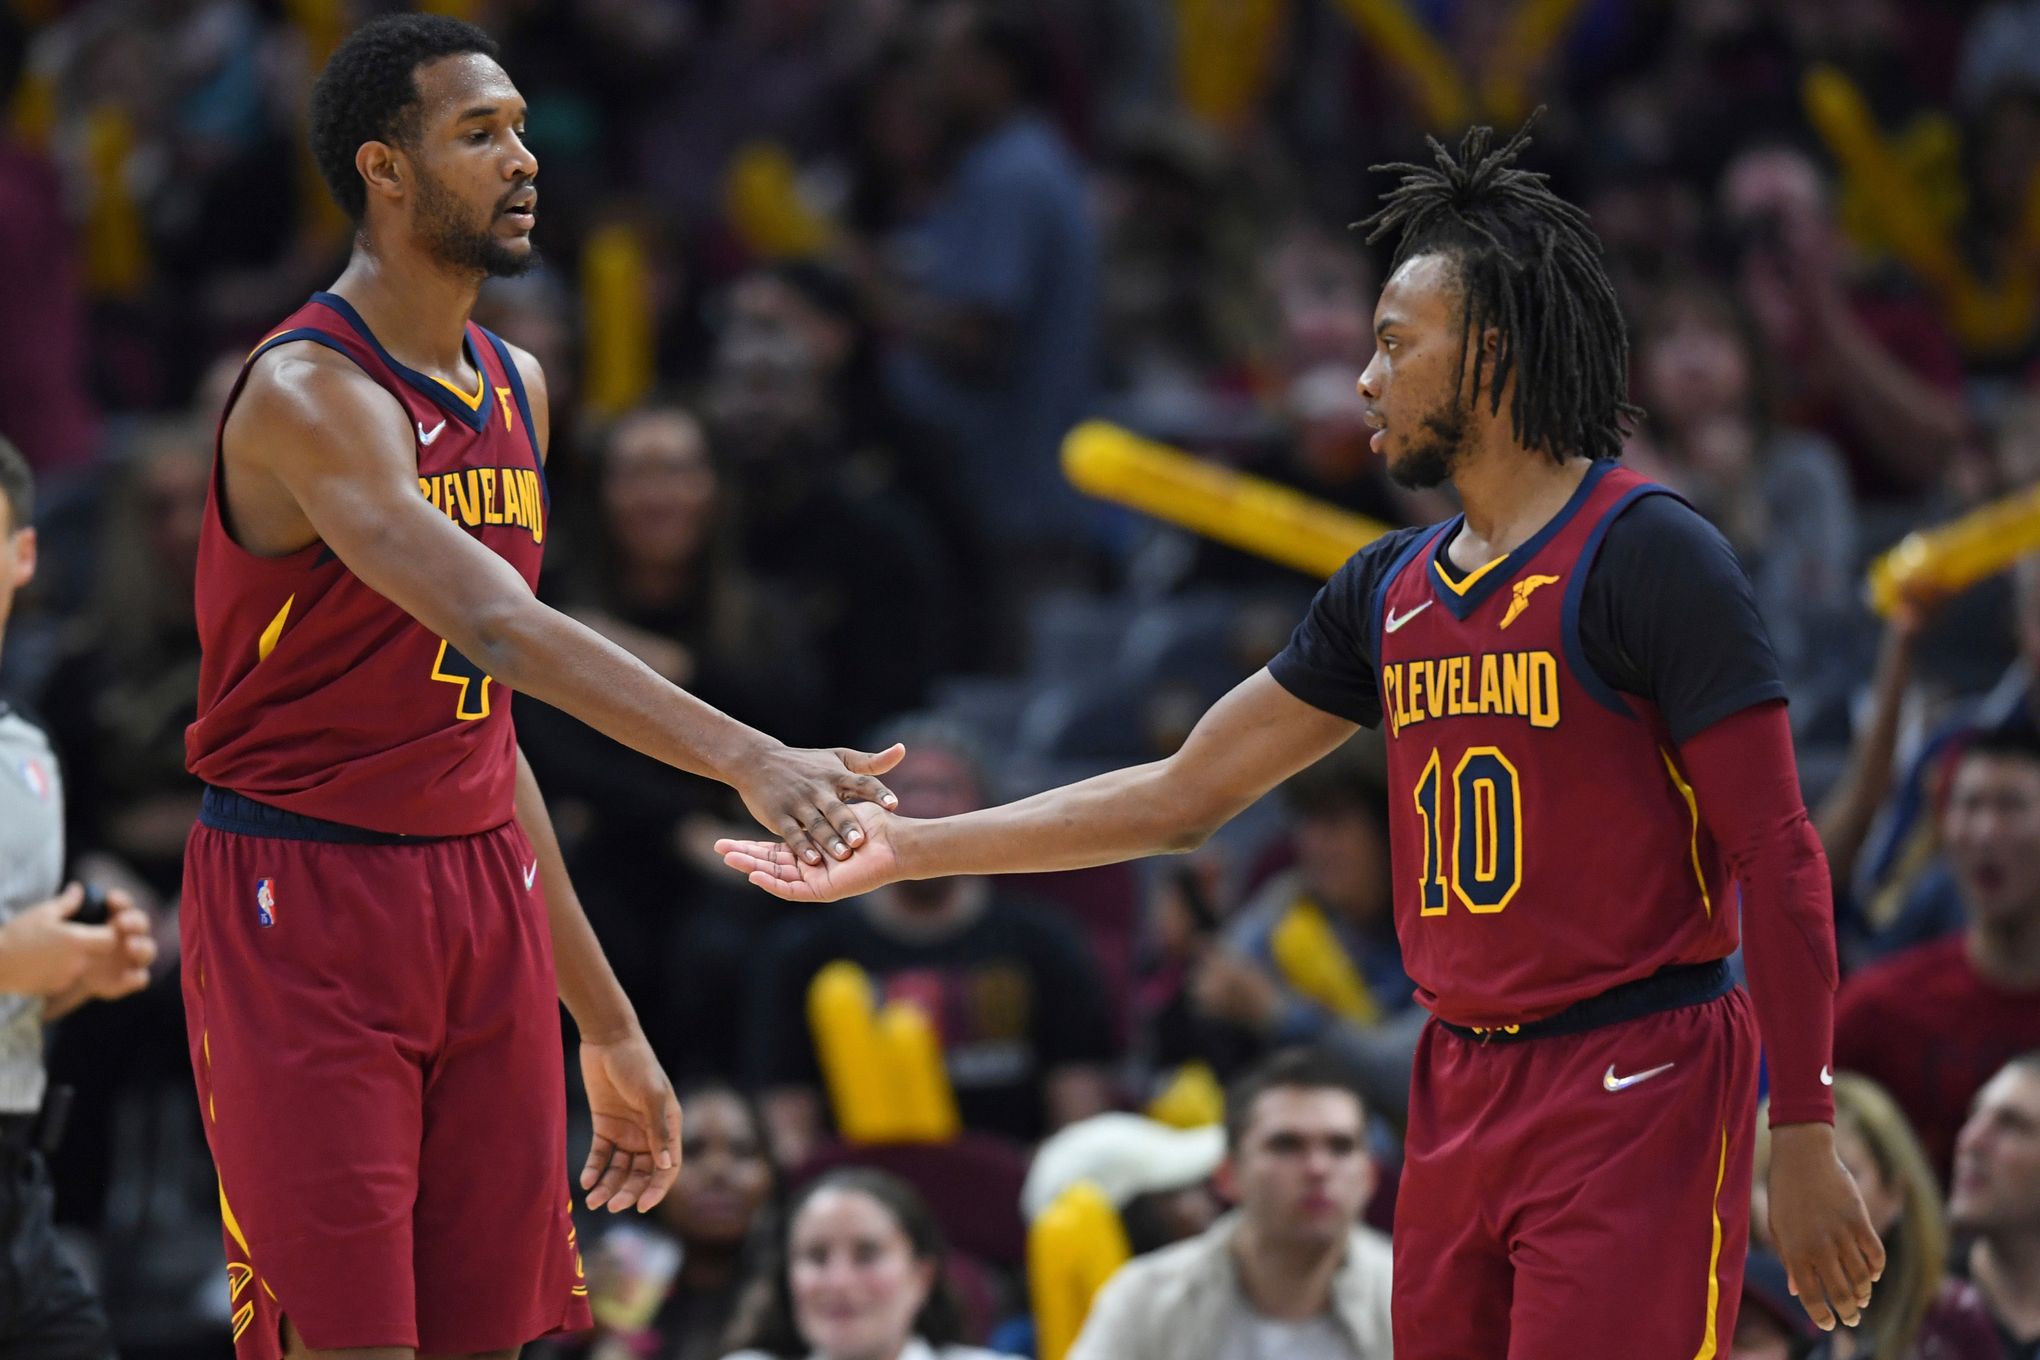 Kevin Love will be missed by Cavs players, Evan Mobley says